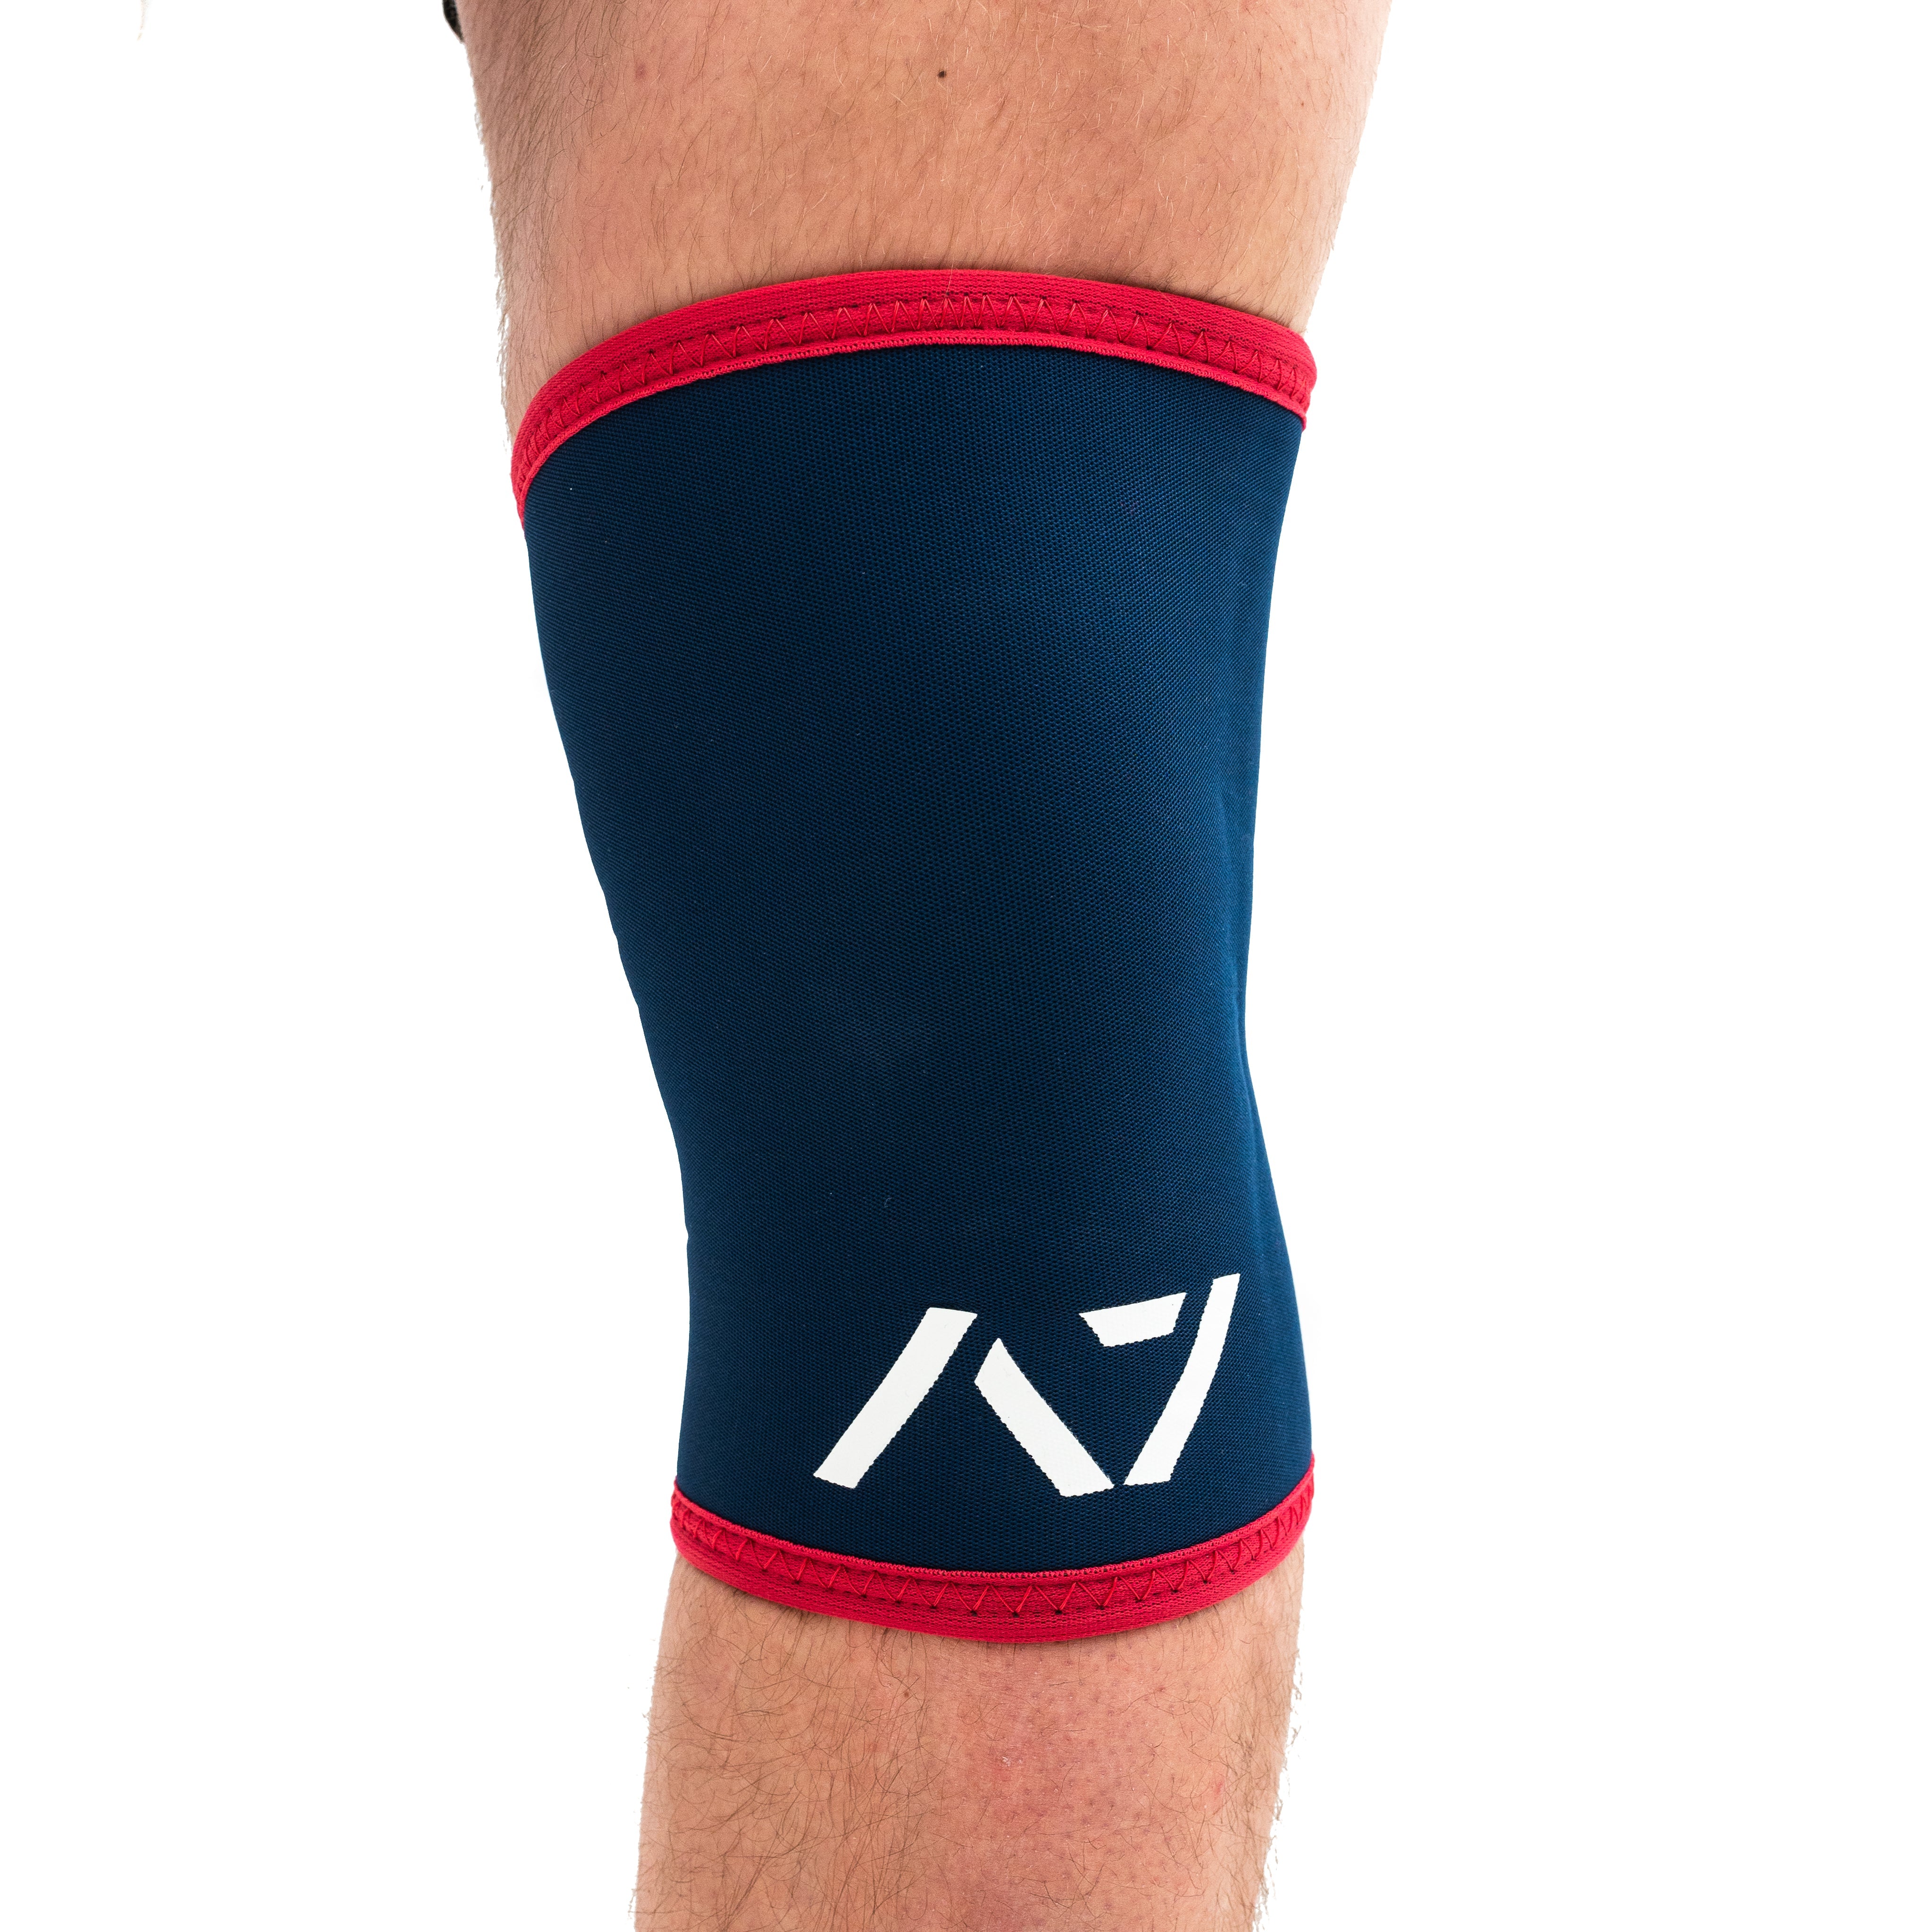 The IPF Approved A7 RWB Stiff knee sleeves are structured with a downward cut panel on the back of the quad and calf to ensure these have the ultimate compression at the knee joint. The A7 CONE RWB Stiff Knee Sleeves are IPF approved and are allowed in all IPF competitions and affiliate federations like the European Powerlifting Federation and all federations across Europe. A7 RWB Stiff Sleeves knee sleeves are IPF Approved Kit. A7 UK shipping to UK and Europe.